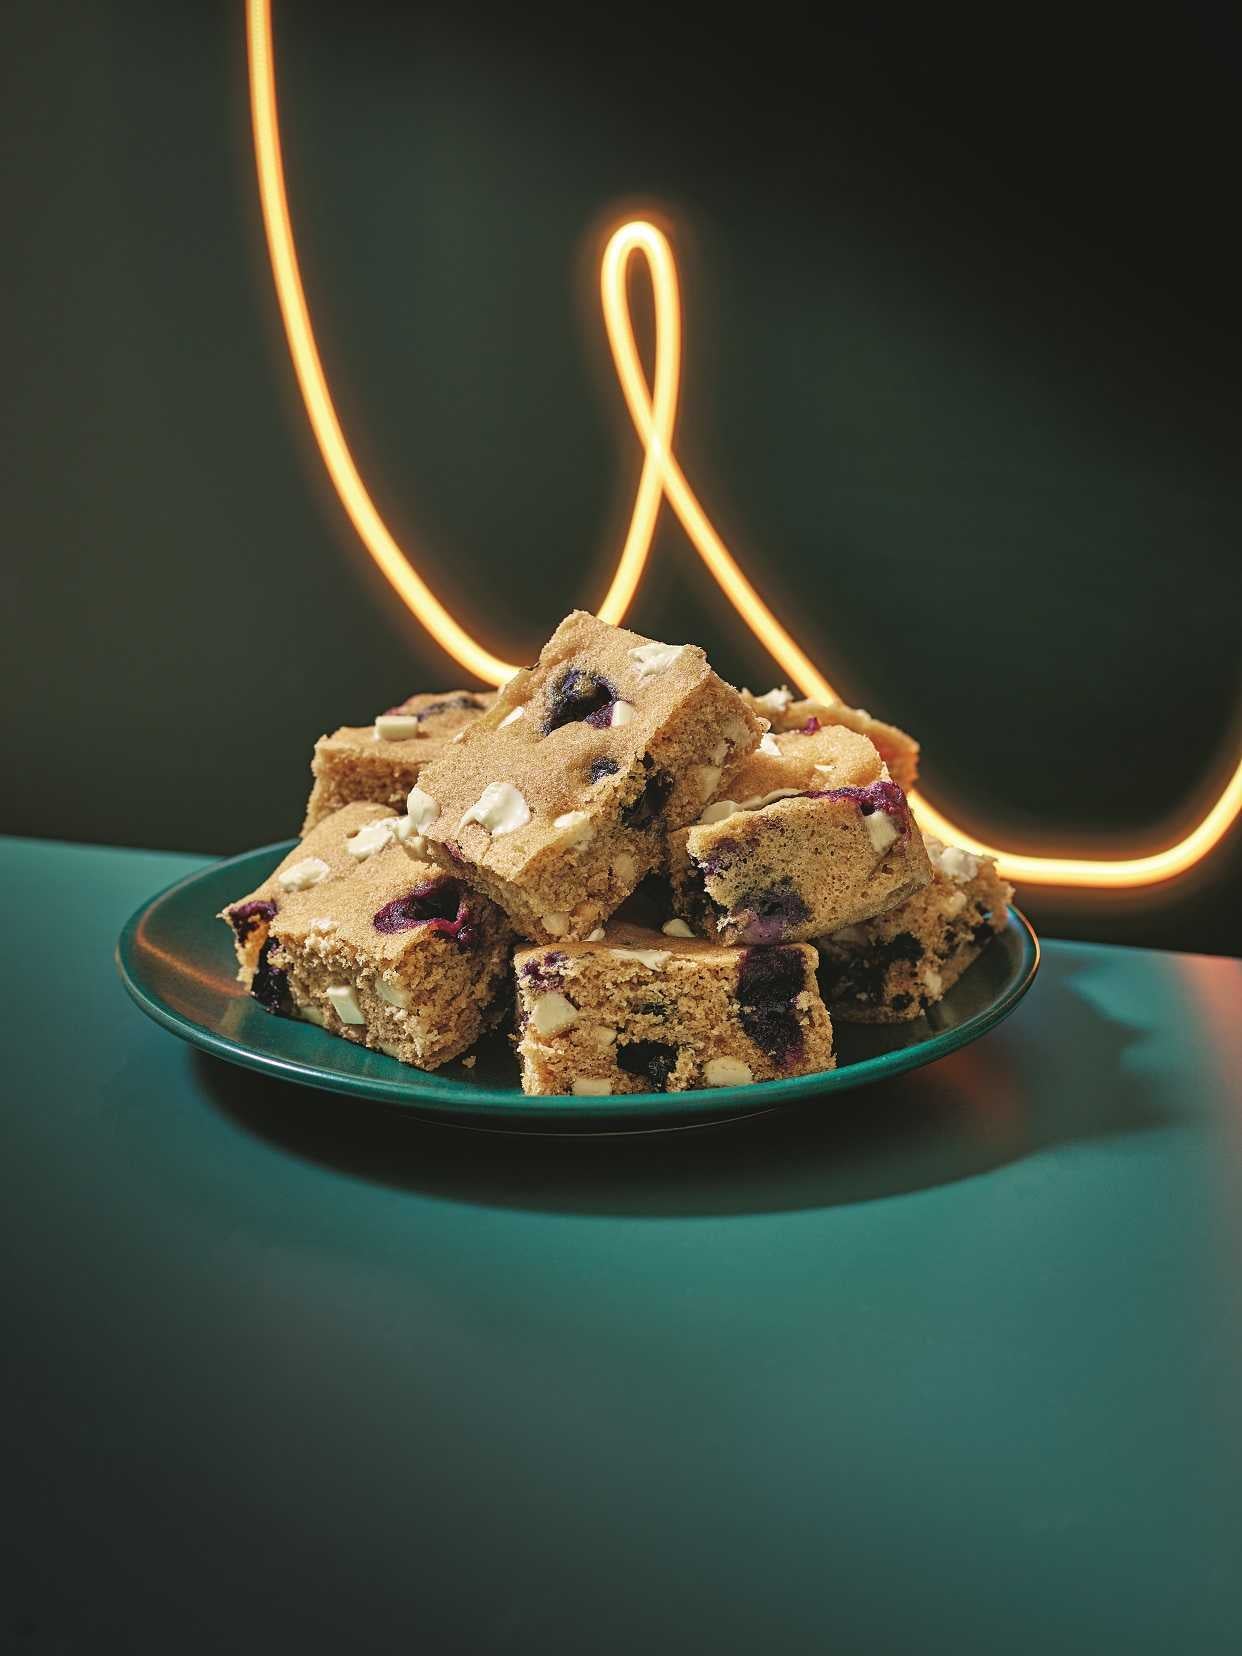 Fancy something sweet? Try these soft and gooey blondies